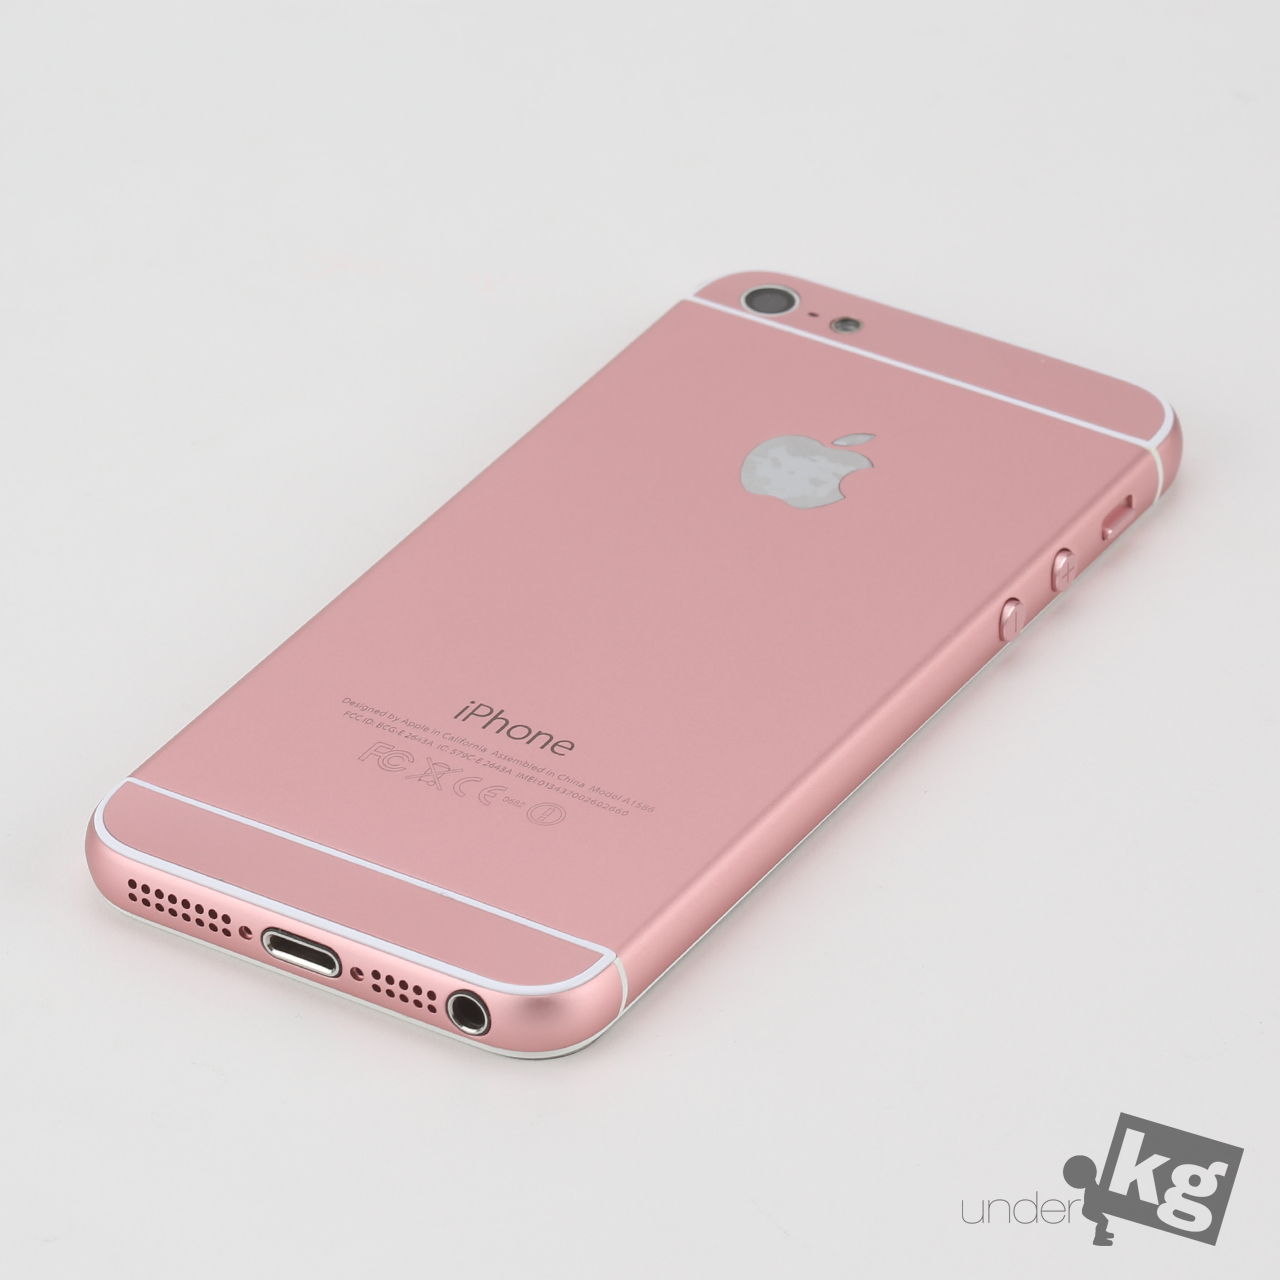 iphone5-to-iphone6-housing-change-pic4.jpg